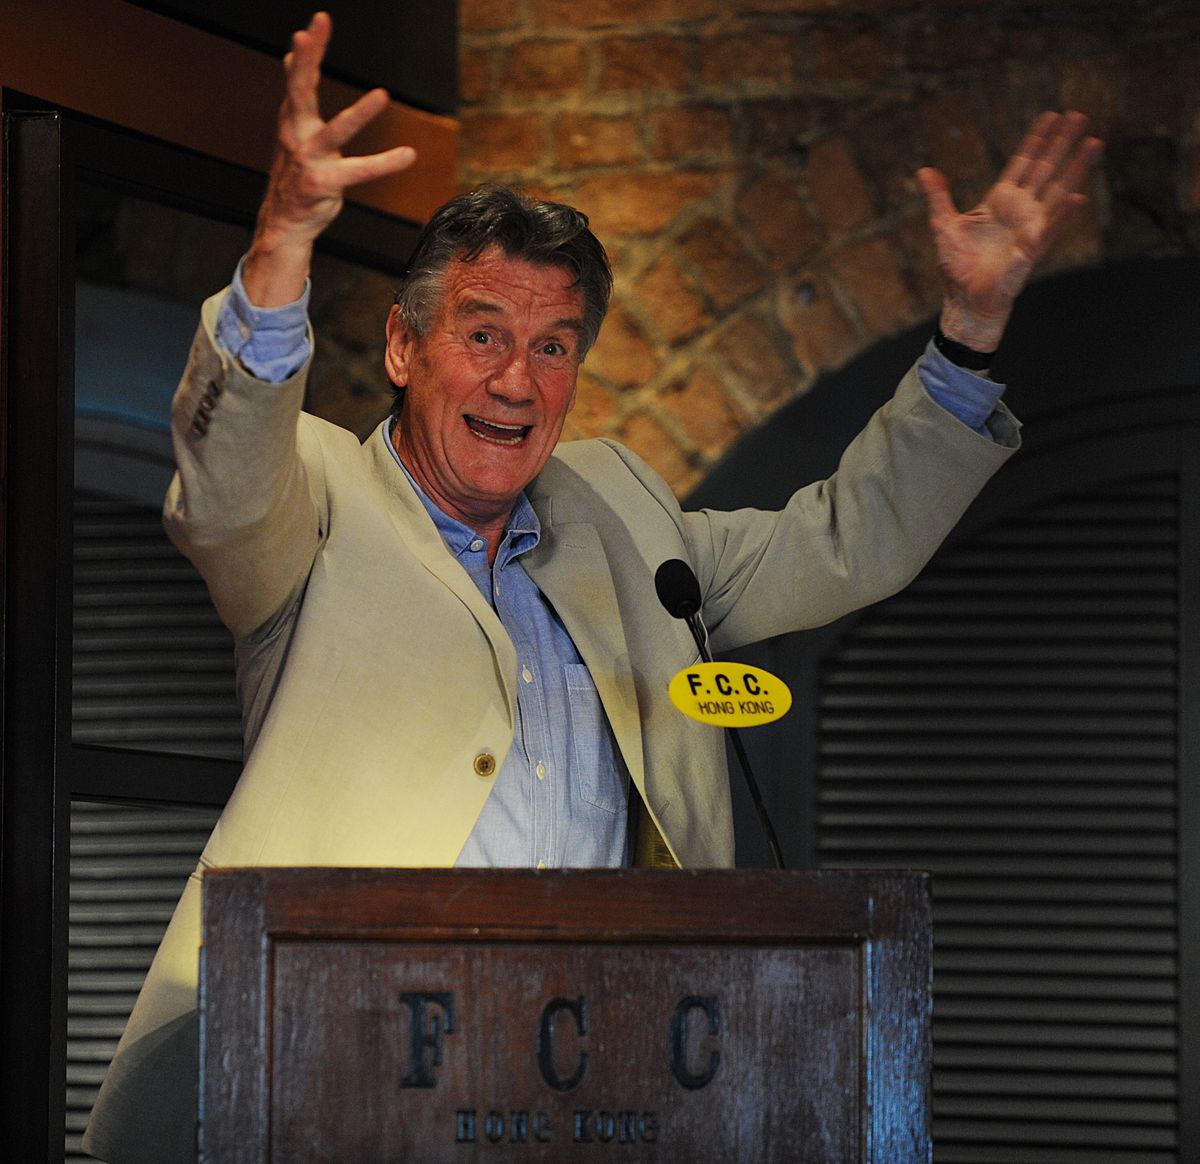 Actor Michael Palin speaks to a packed F